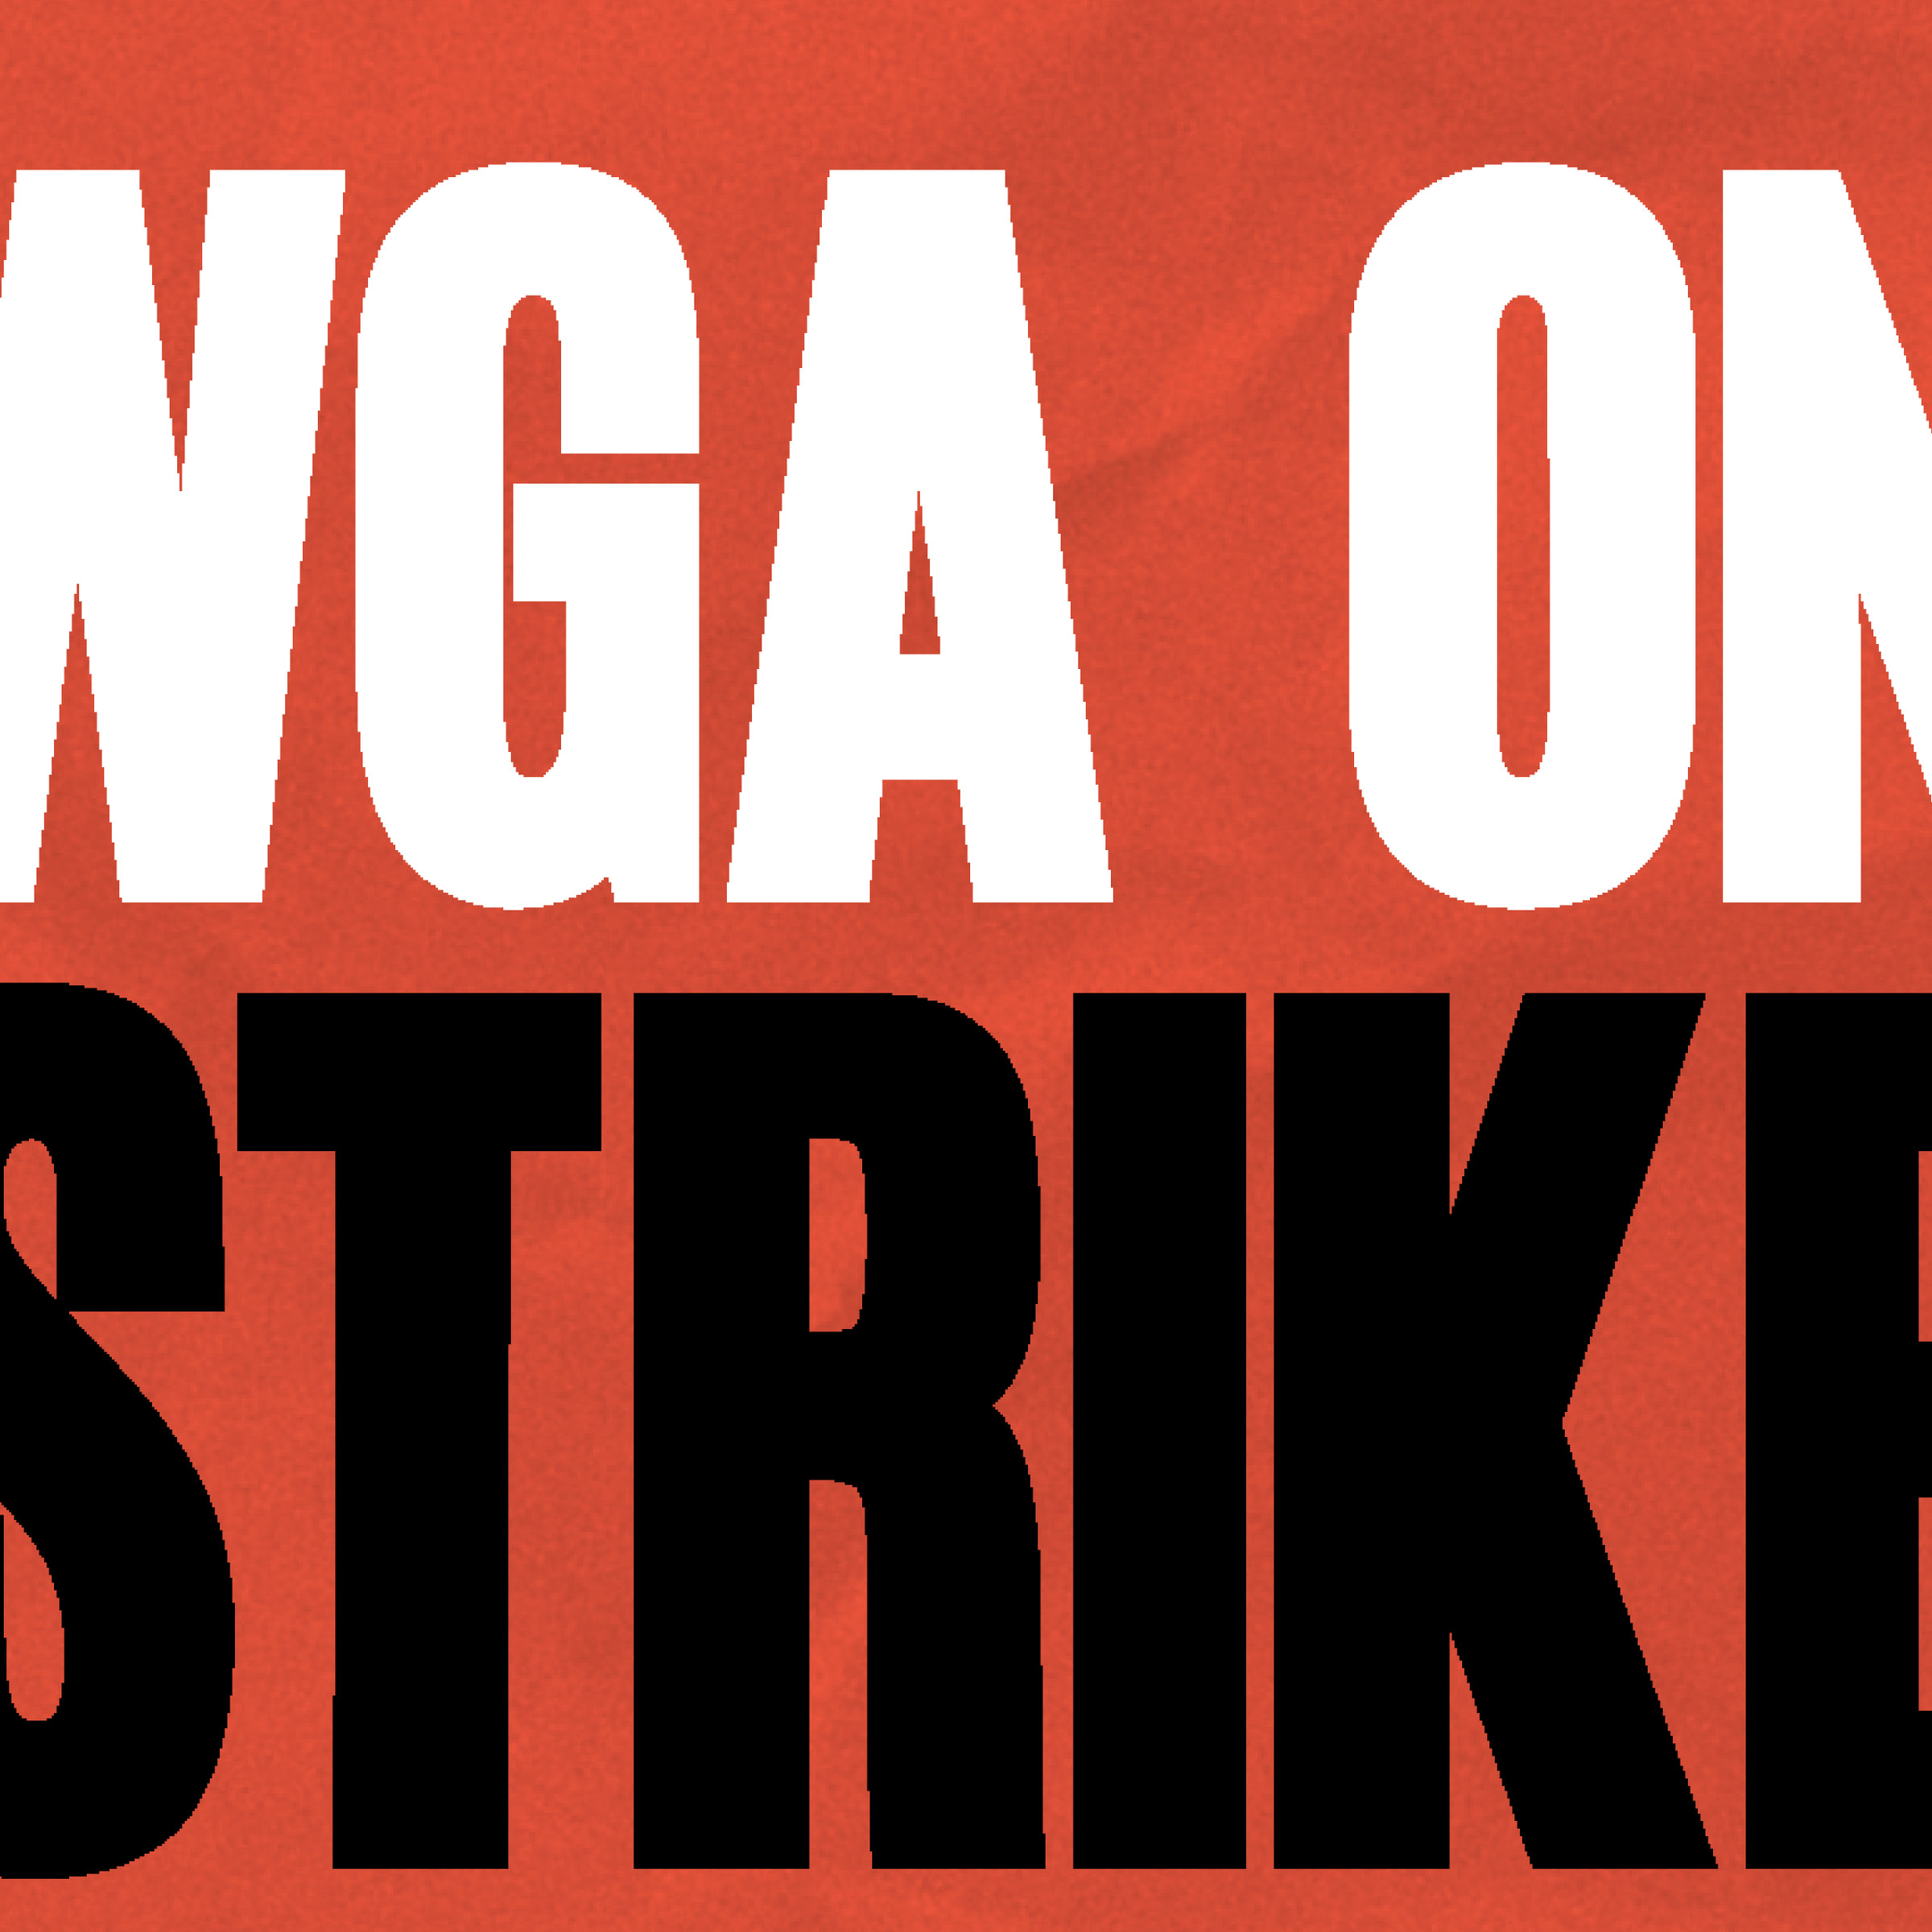 White and black text reading “WGA ON STRIKE” on a red background.